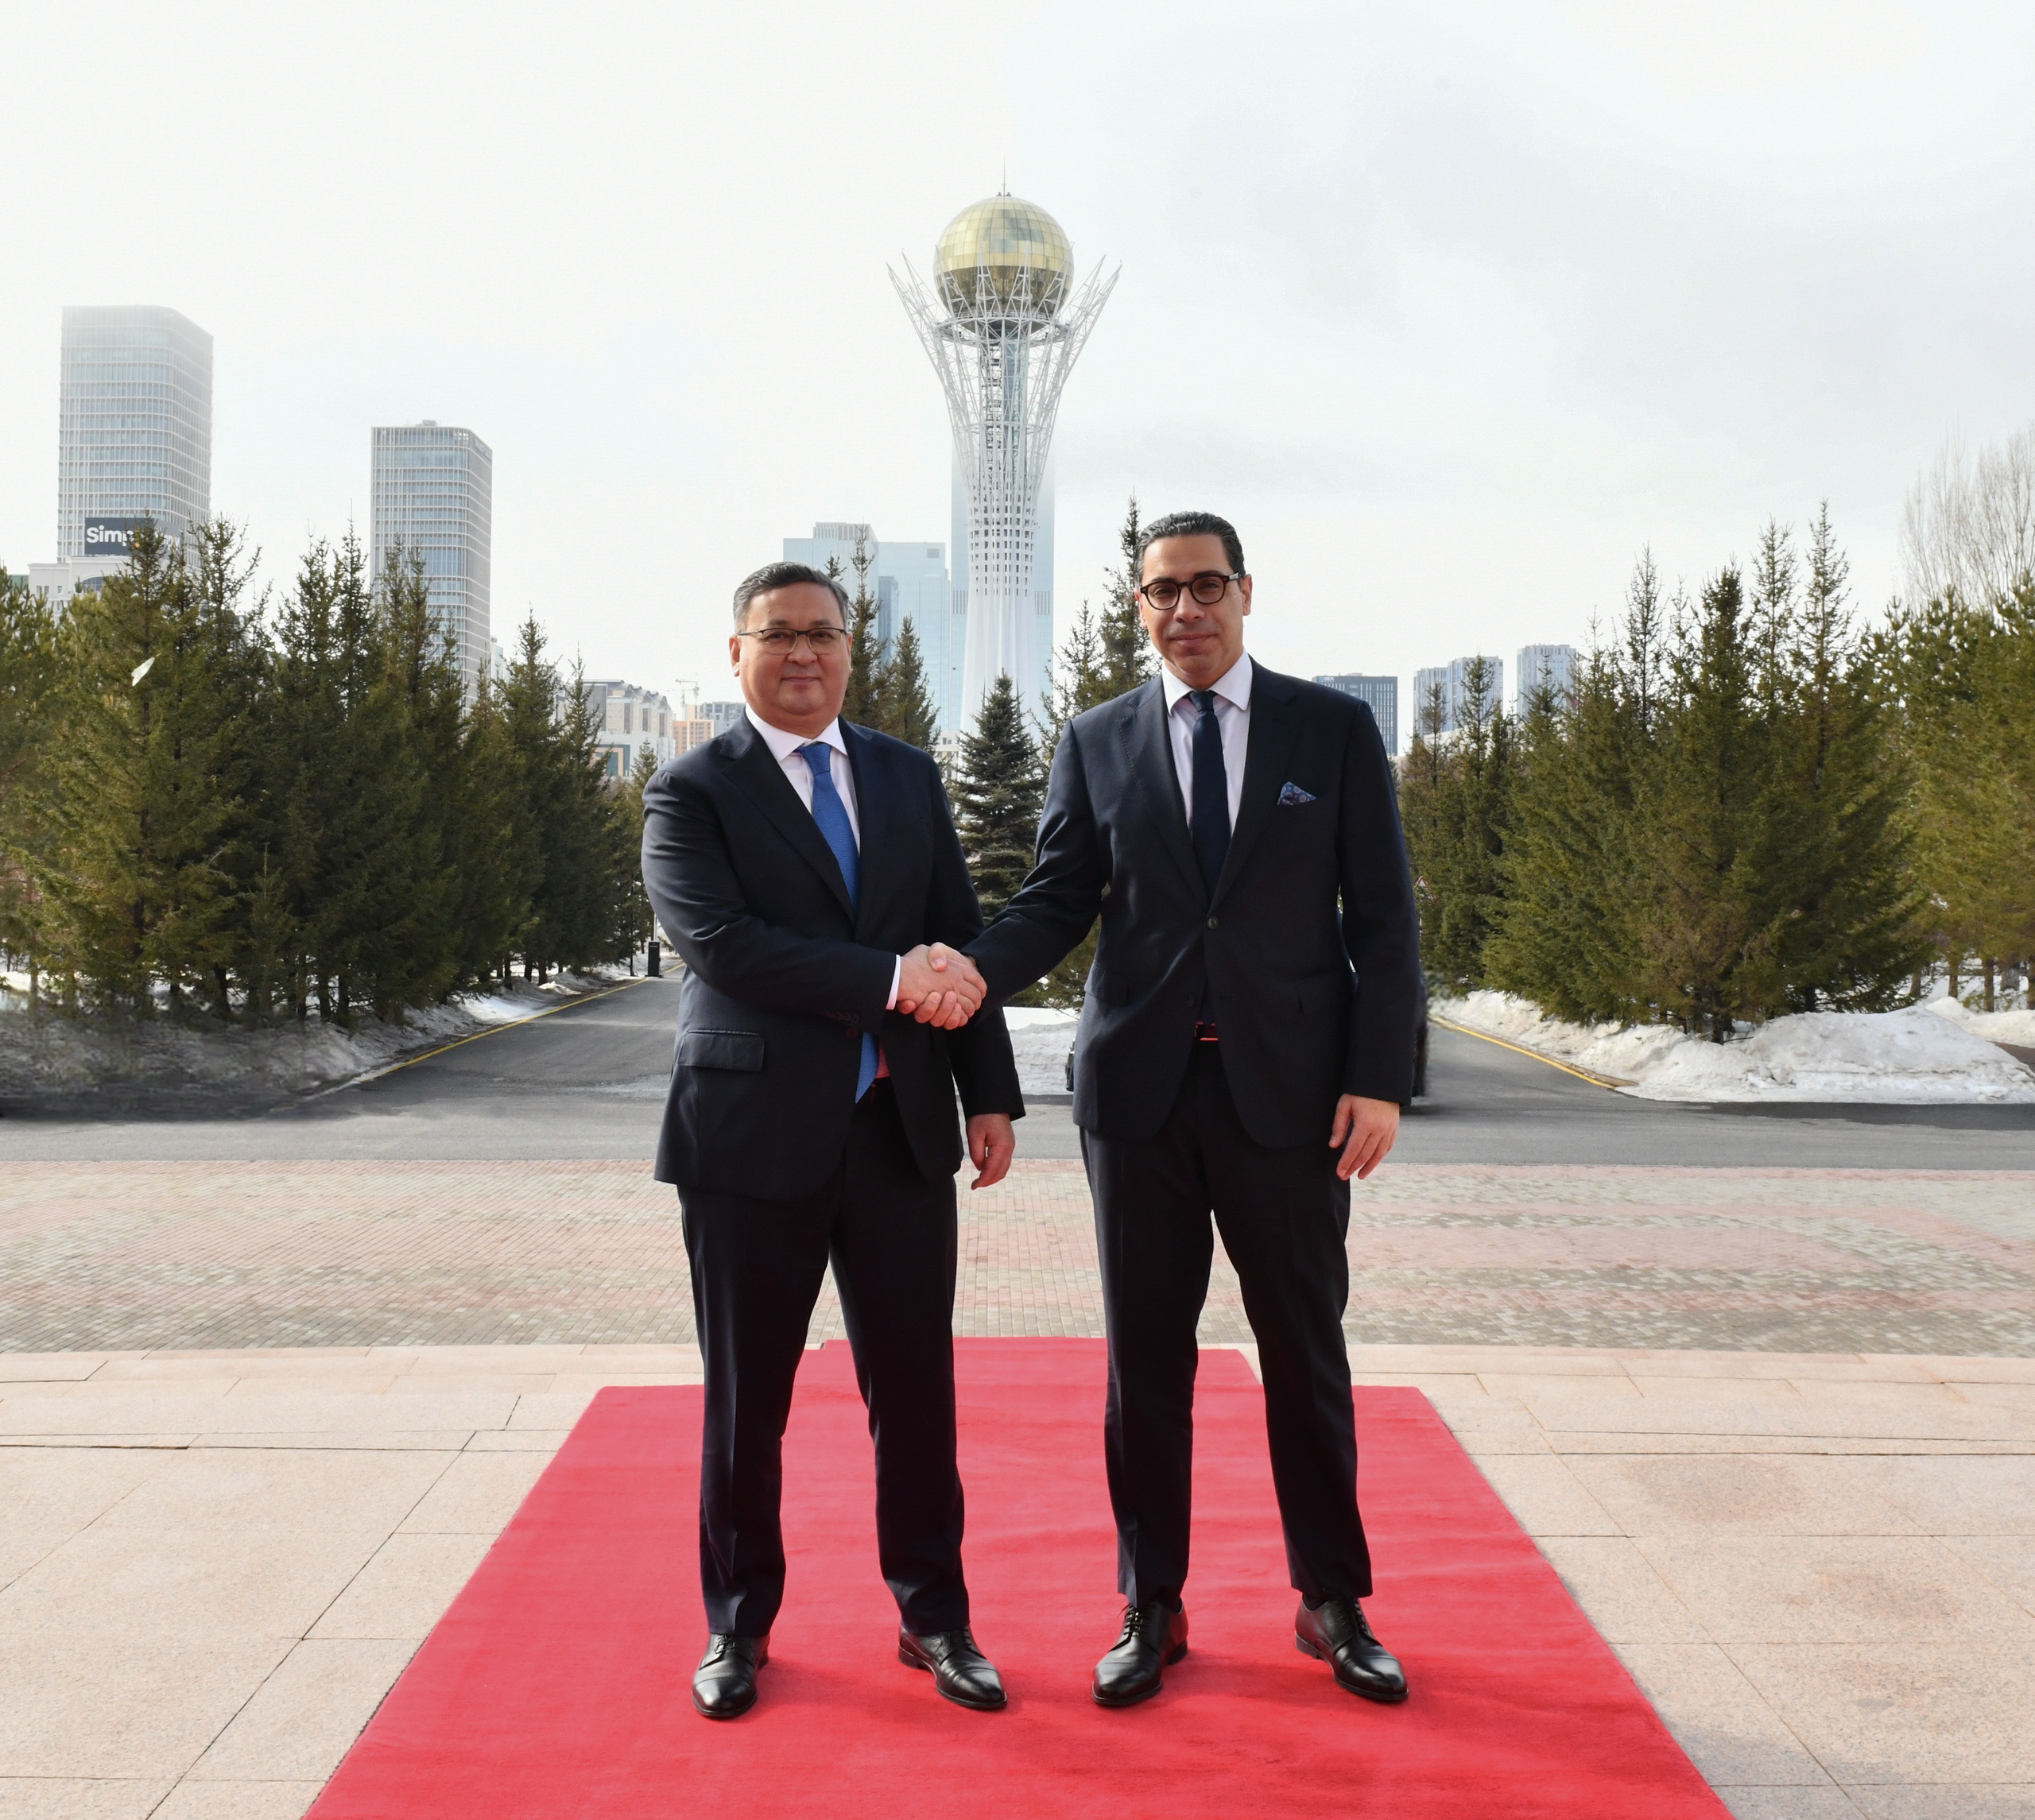 A new chapter in the history of Kazakh-Cypriot relations